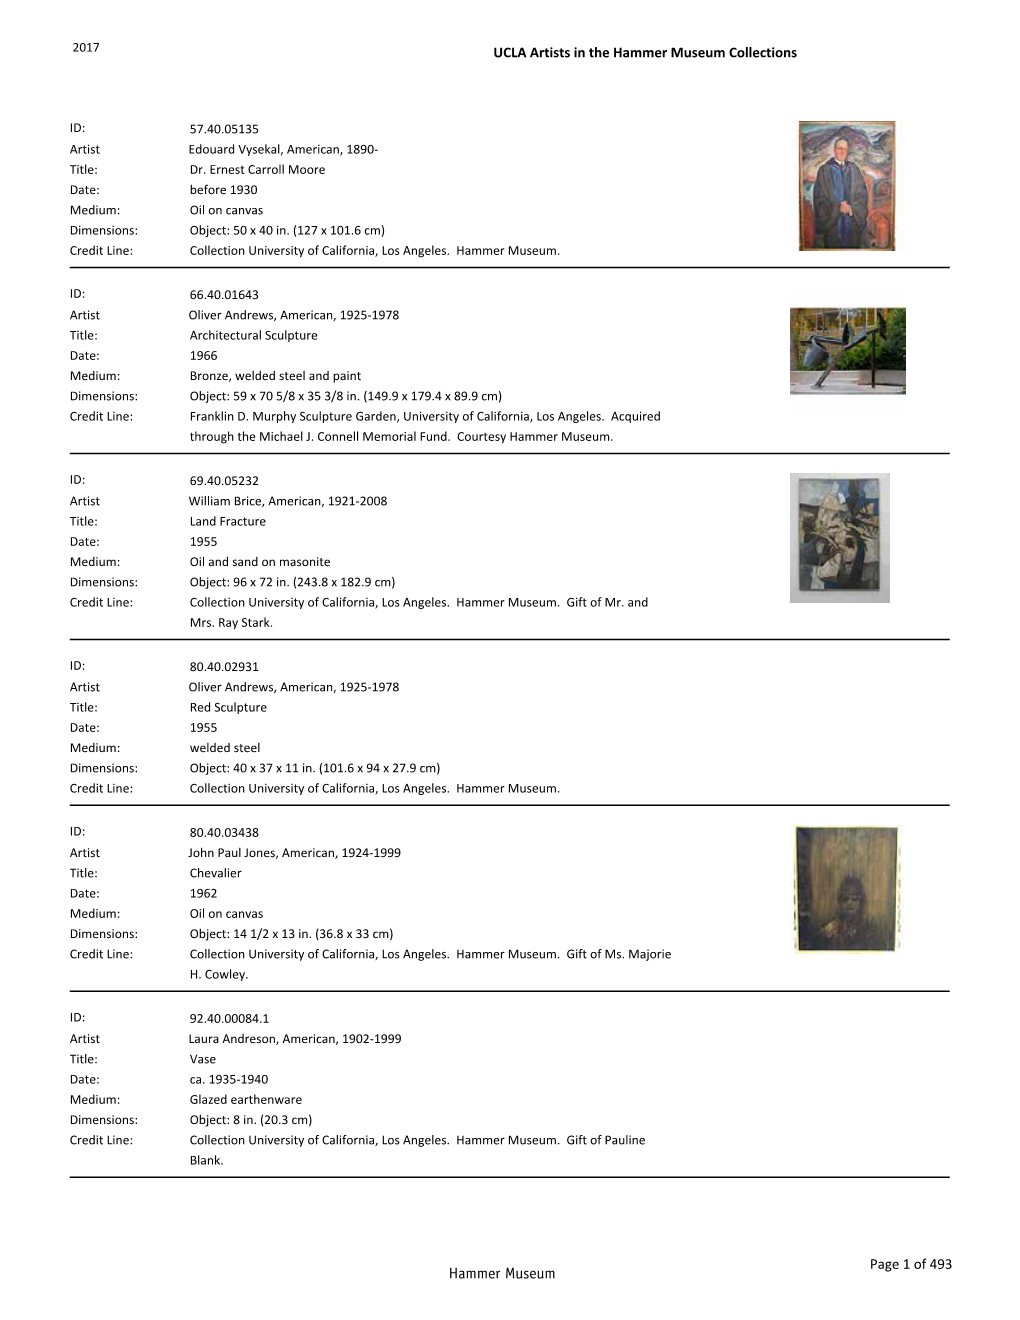 UCLA Artists in the Hammer Museum Collections Full Checklist